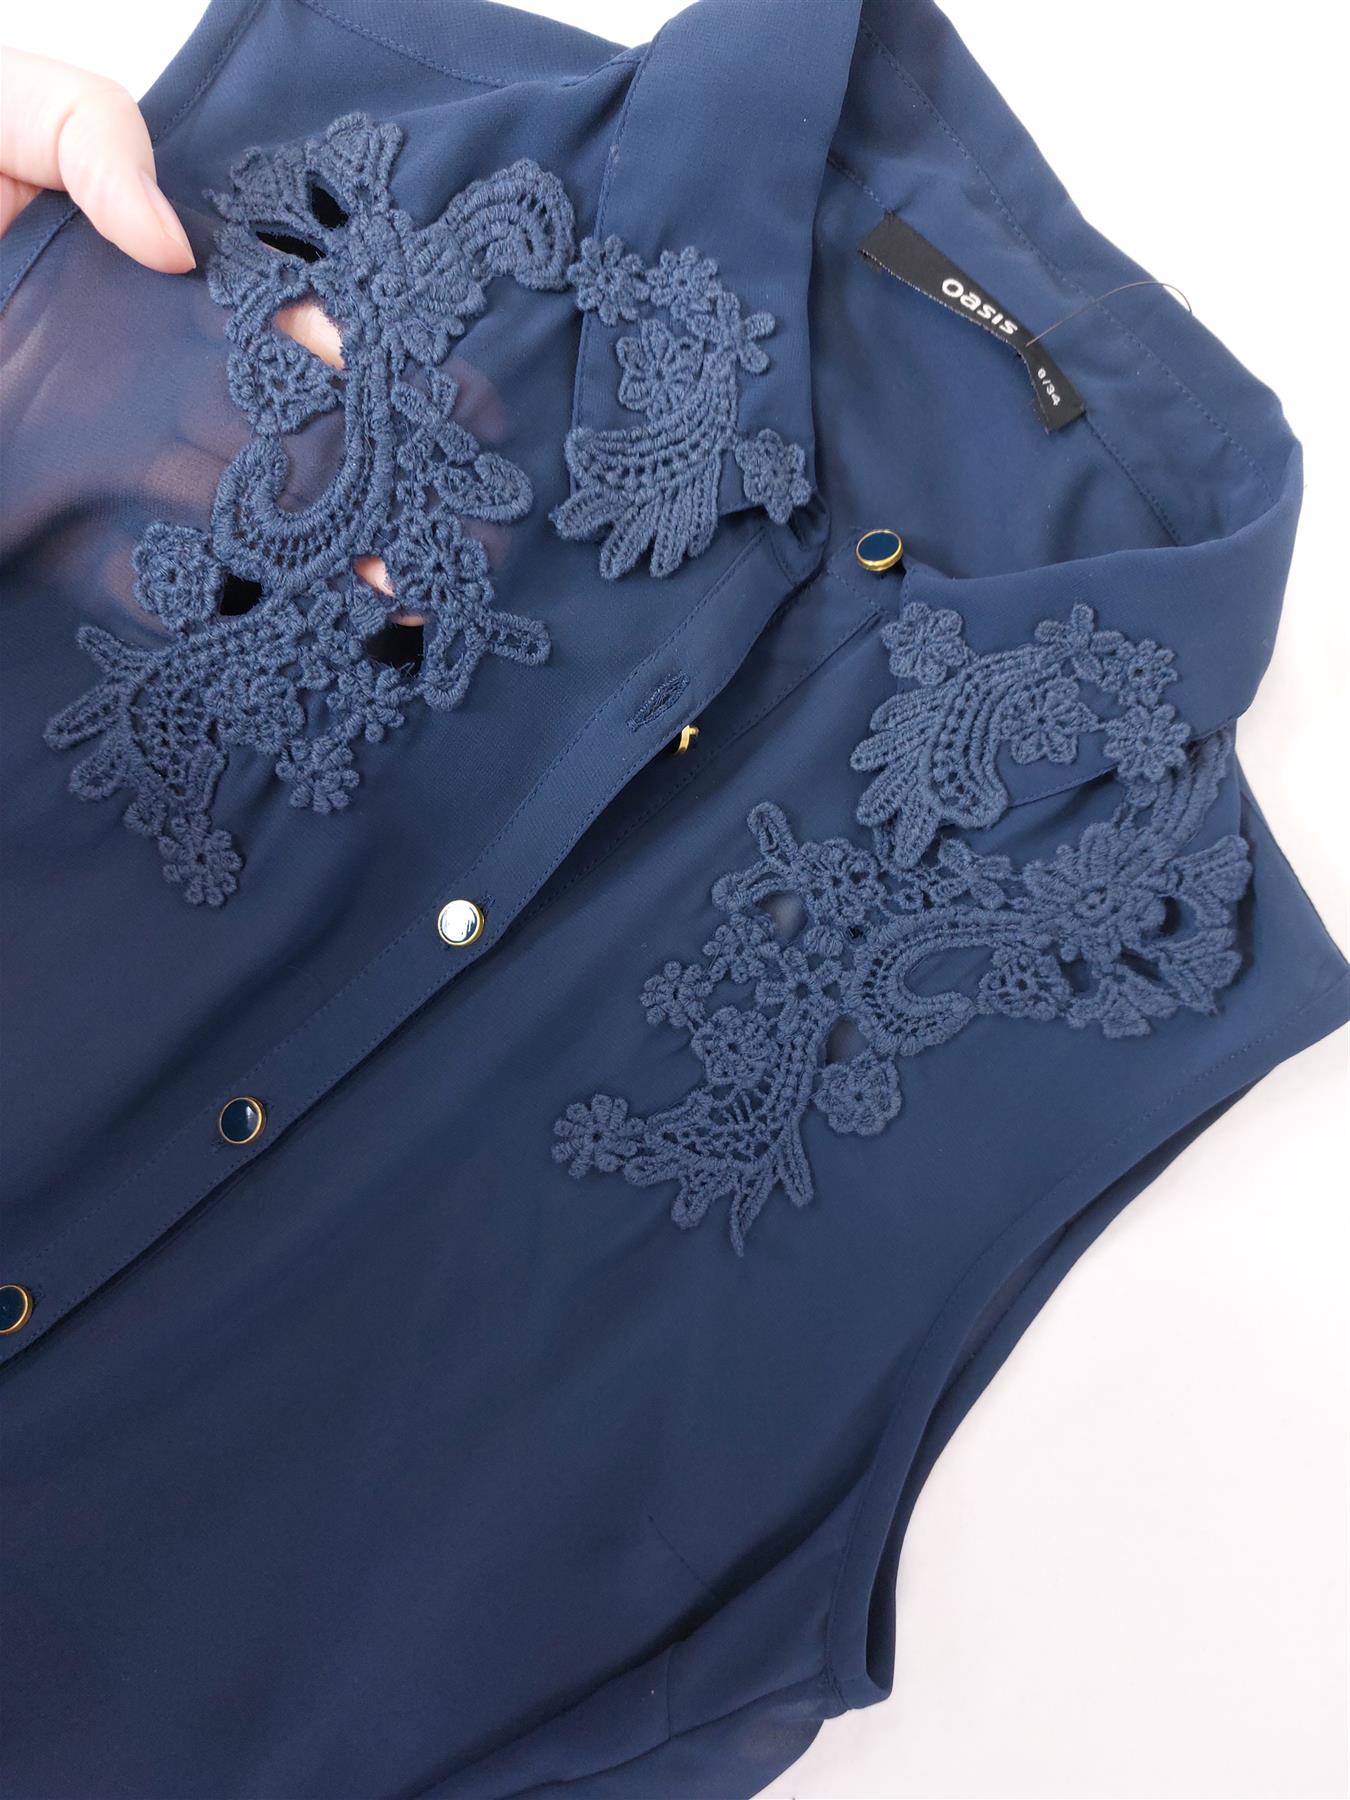 New Oasis Women's Blouse Navy Blue Sleeveless Sheer Lace Chiffon Embroidered Top